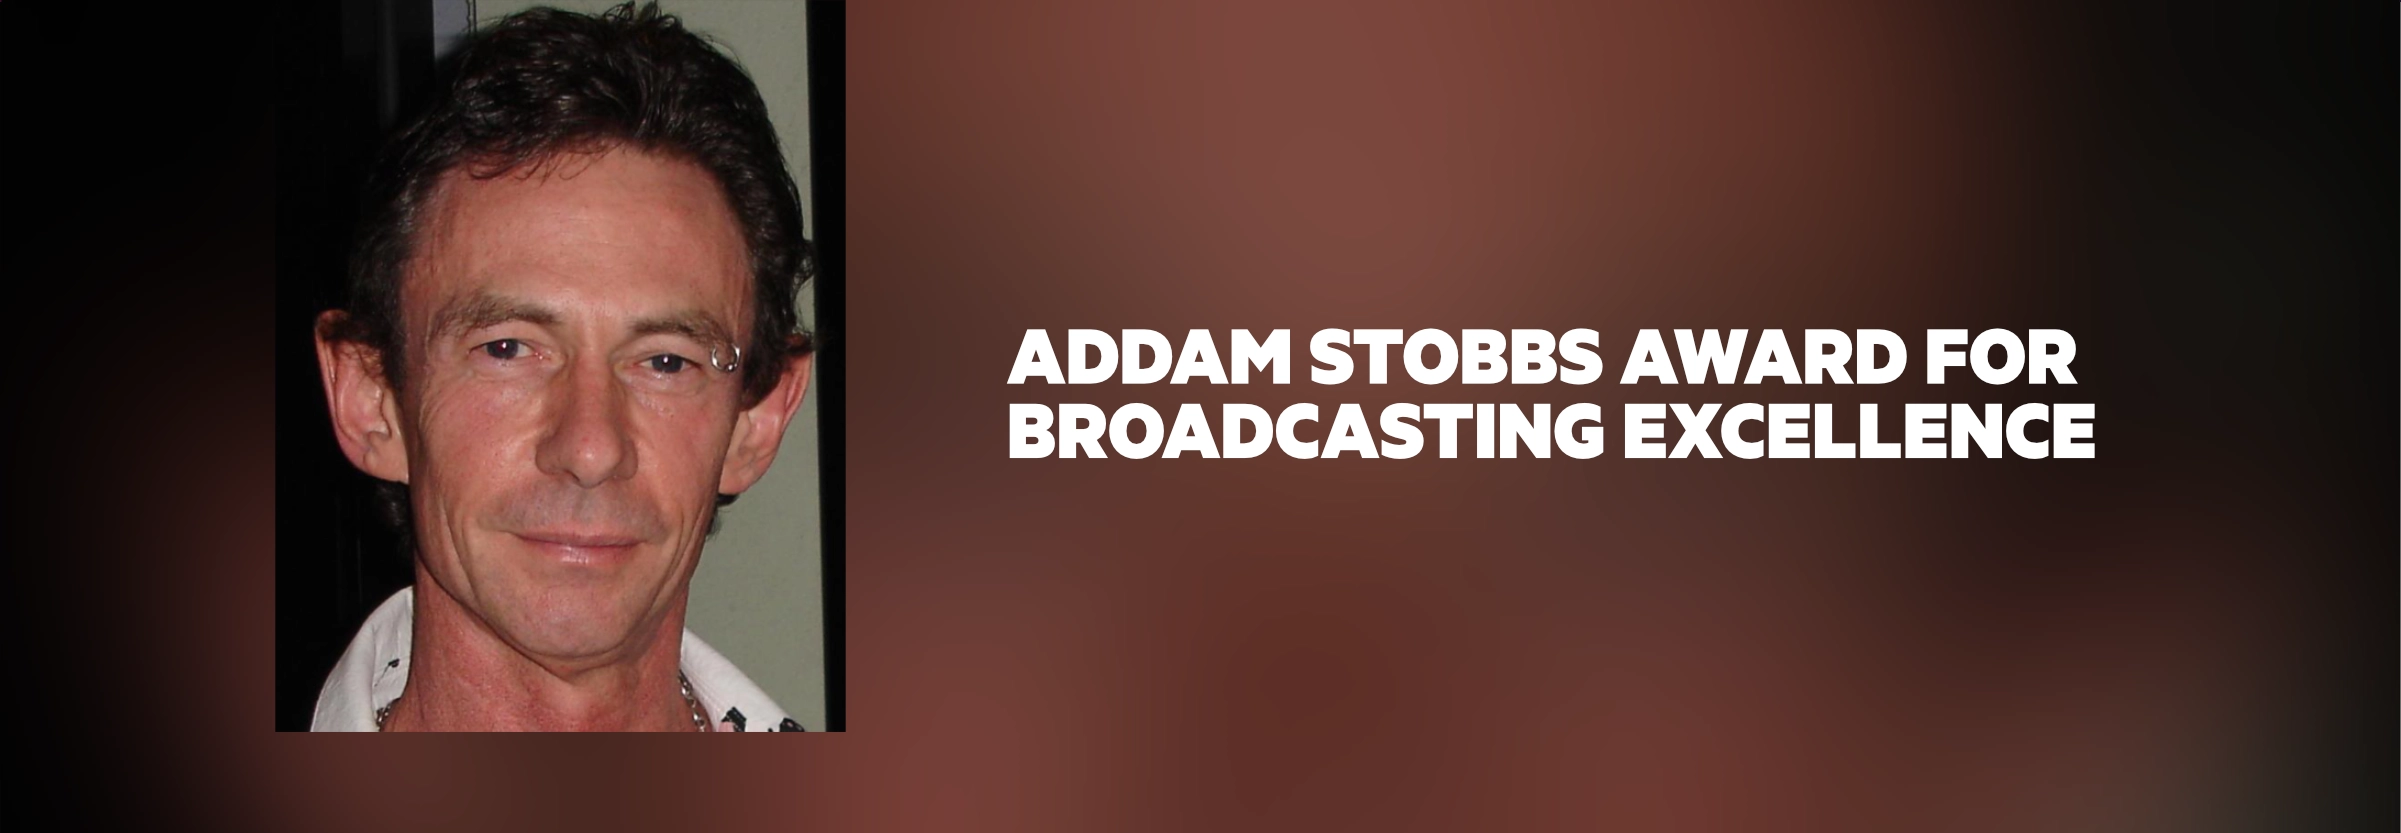 ADDAM STOBBS AWARD FOR BROADCASTING EXCELLENCE